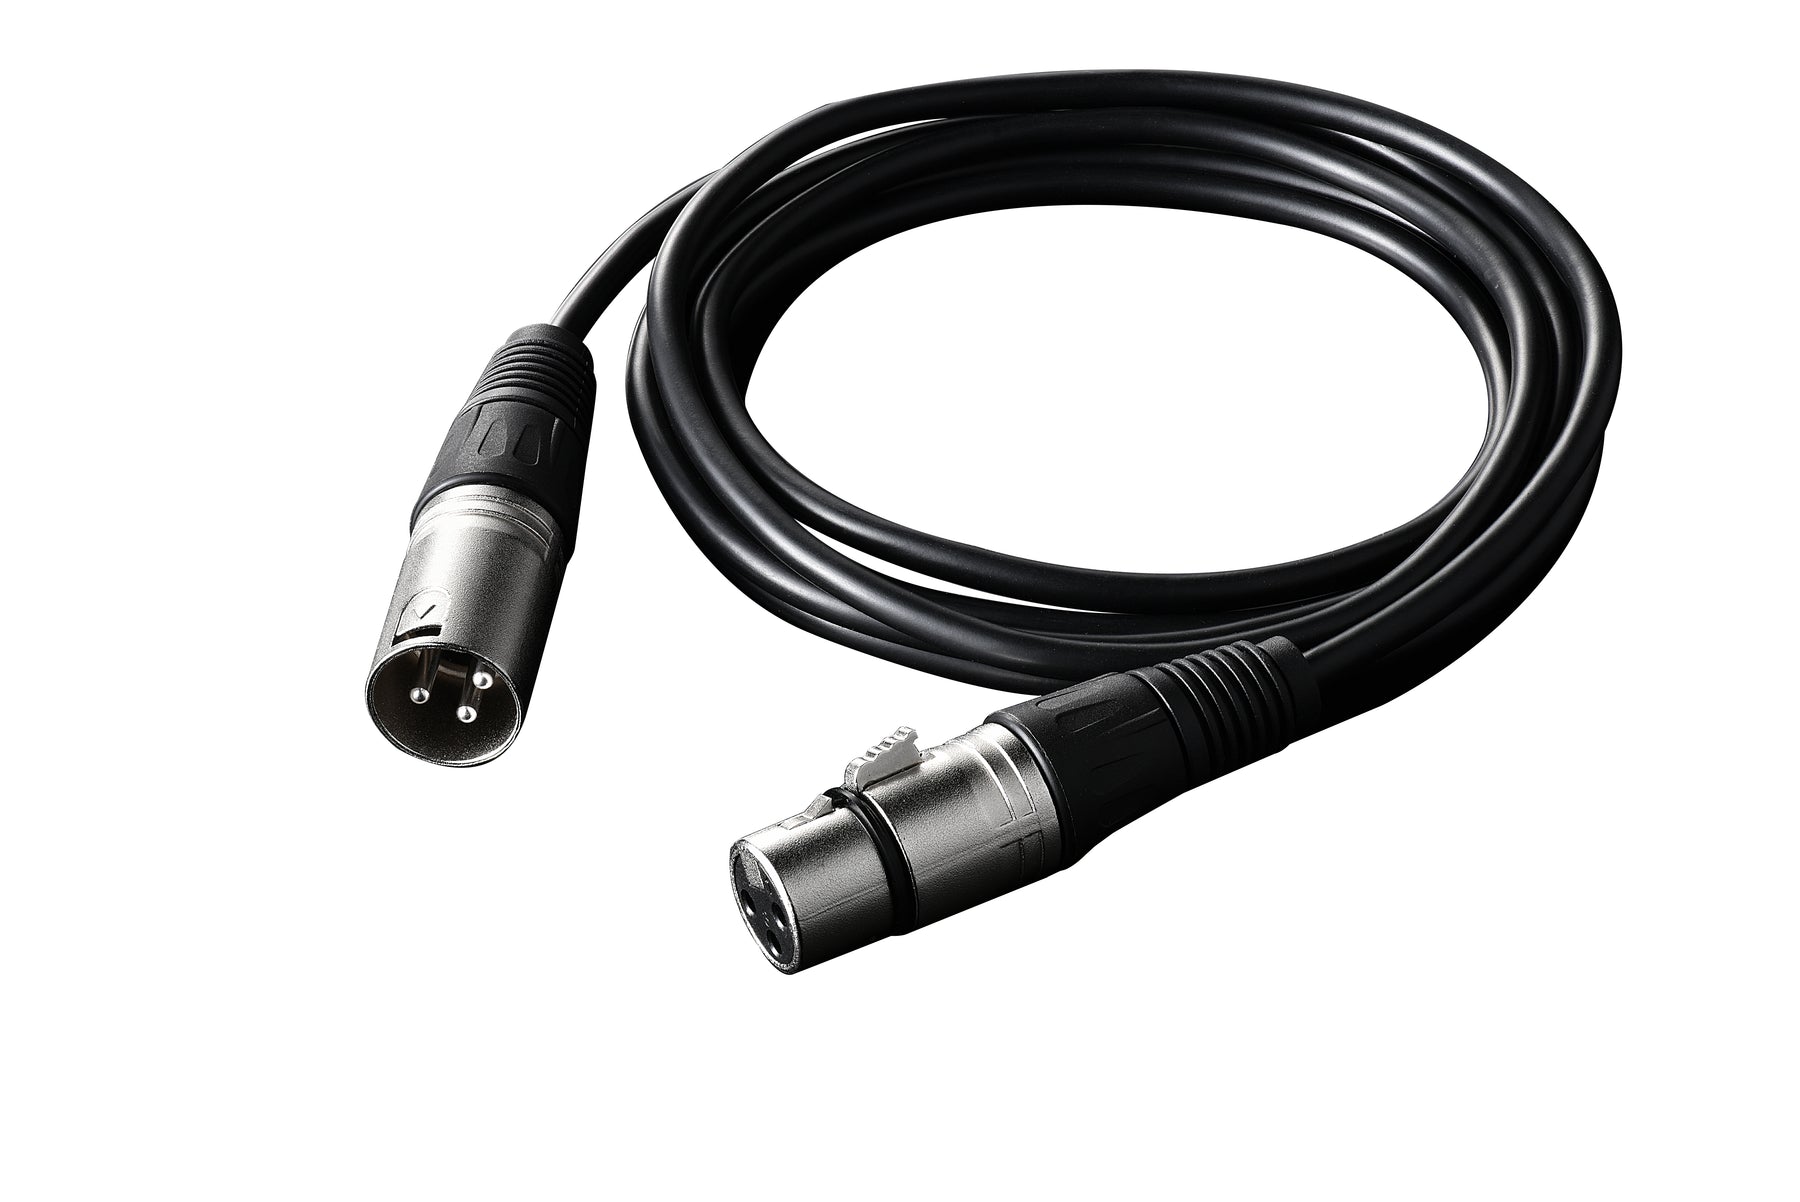 IBRA XLR Mic Cable Premium Quality Pro Microphone Lead | Balanced Male XLR to Female XLR | 6 Metre | Clearer Sound for PA Systems, Studio Recording, Mixers, Amplification & Speakers - BLACK